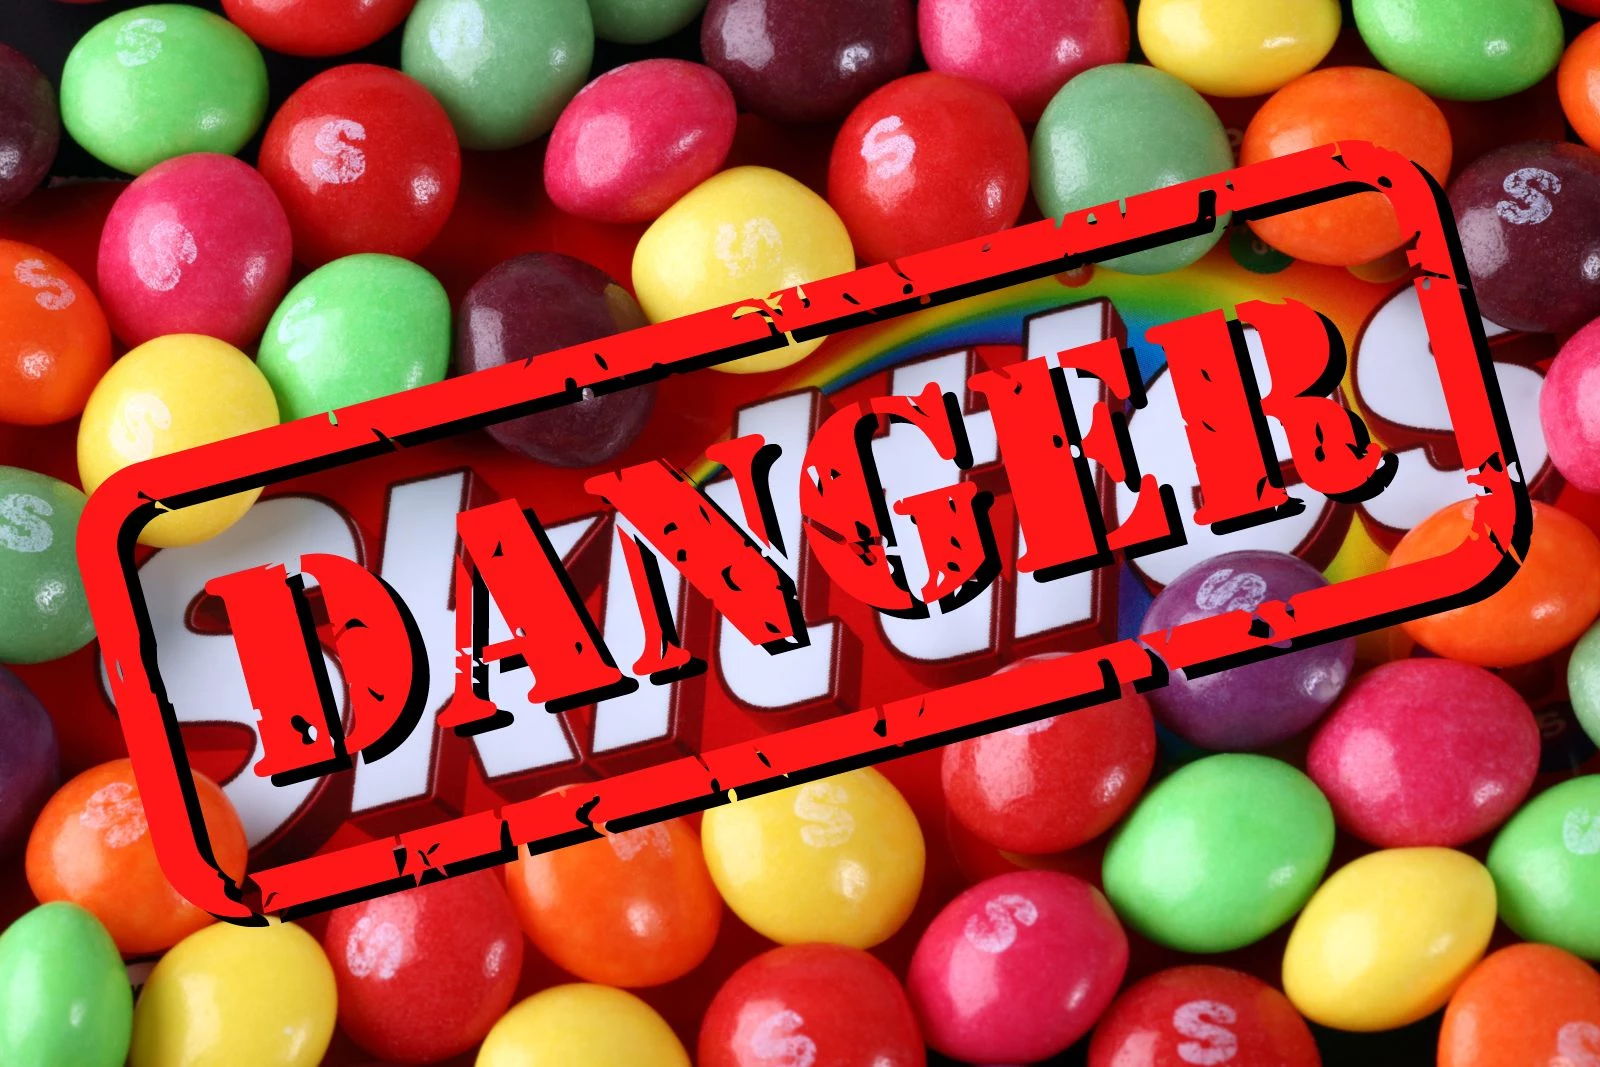 What foods have titanium dioxide? What to know after Skittles lawsuit